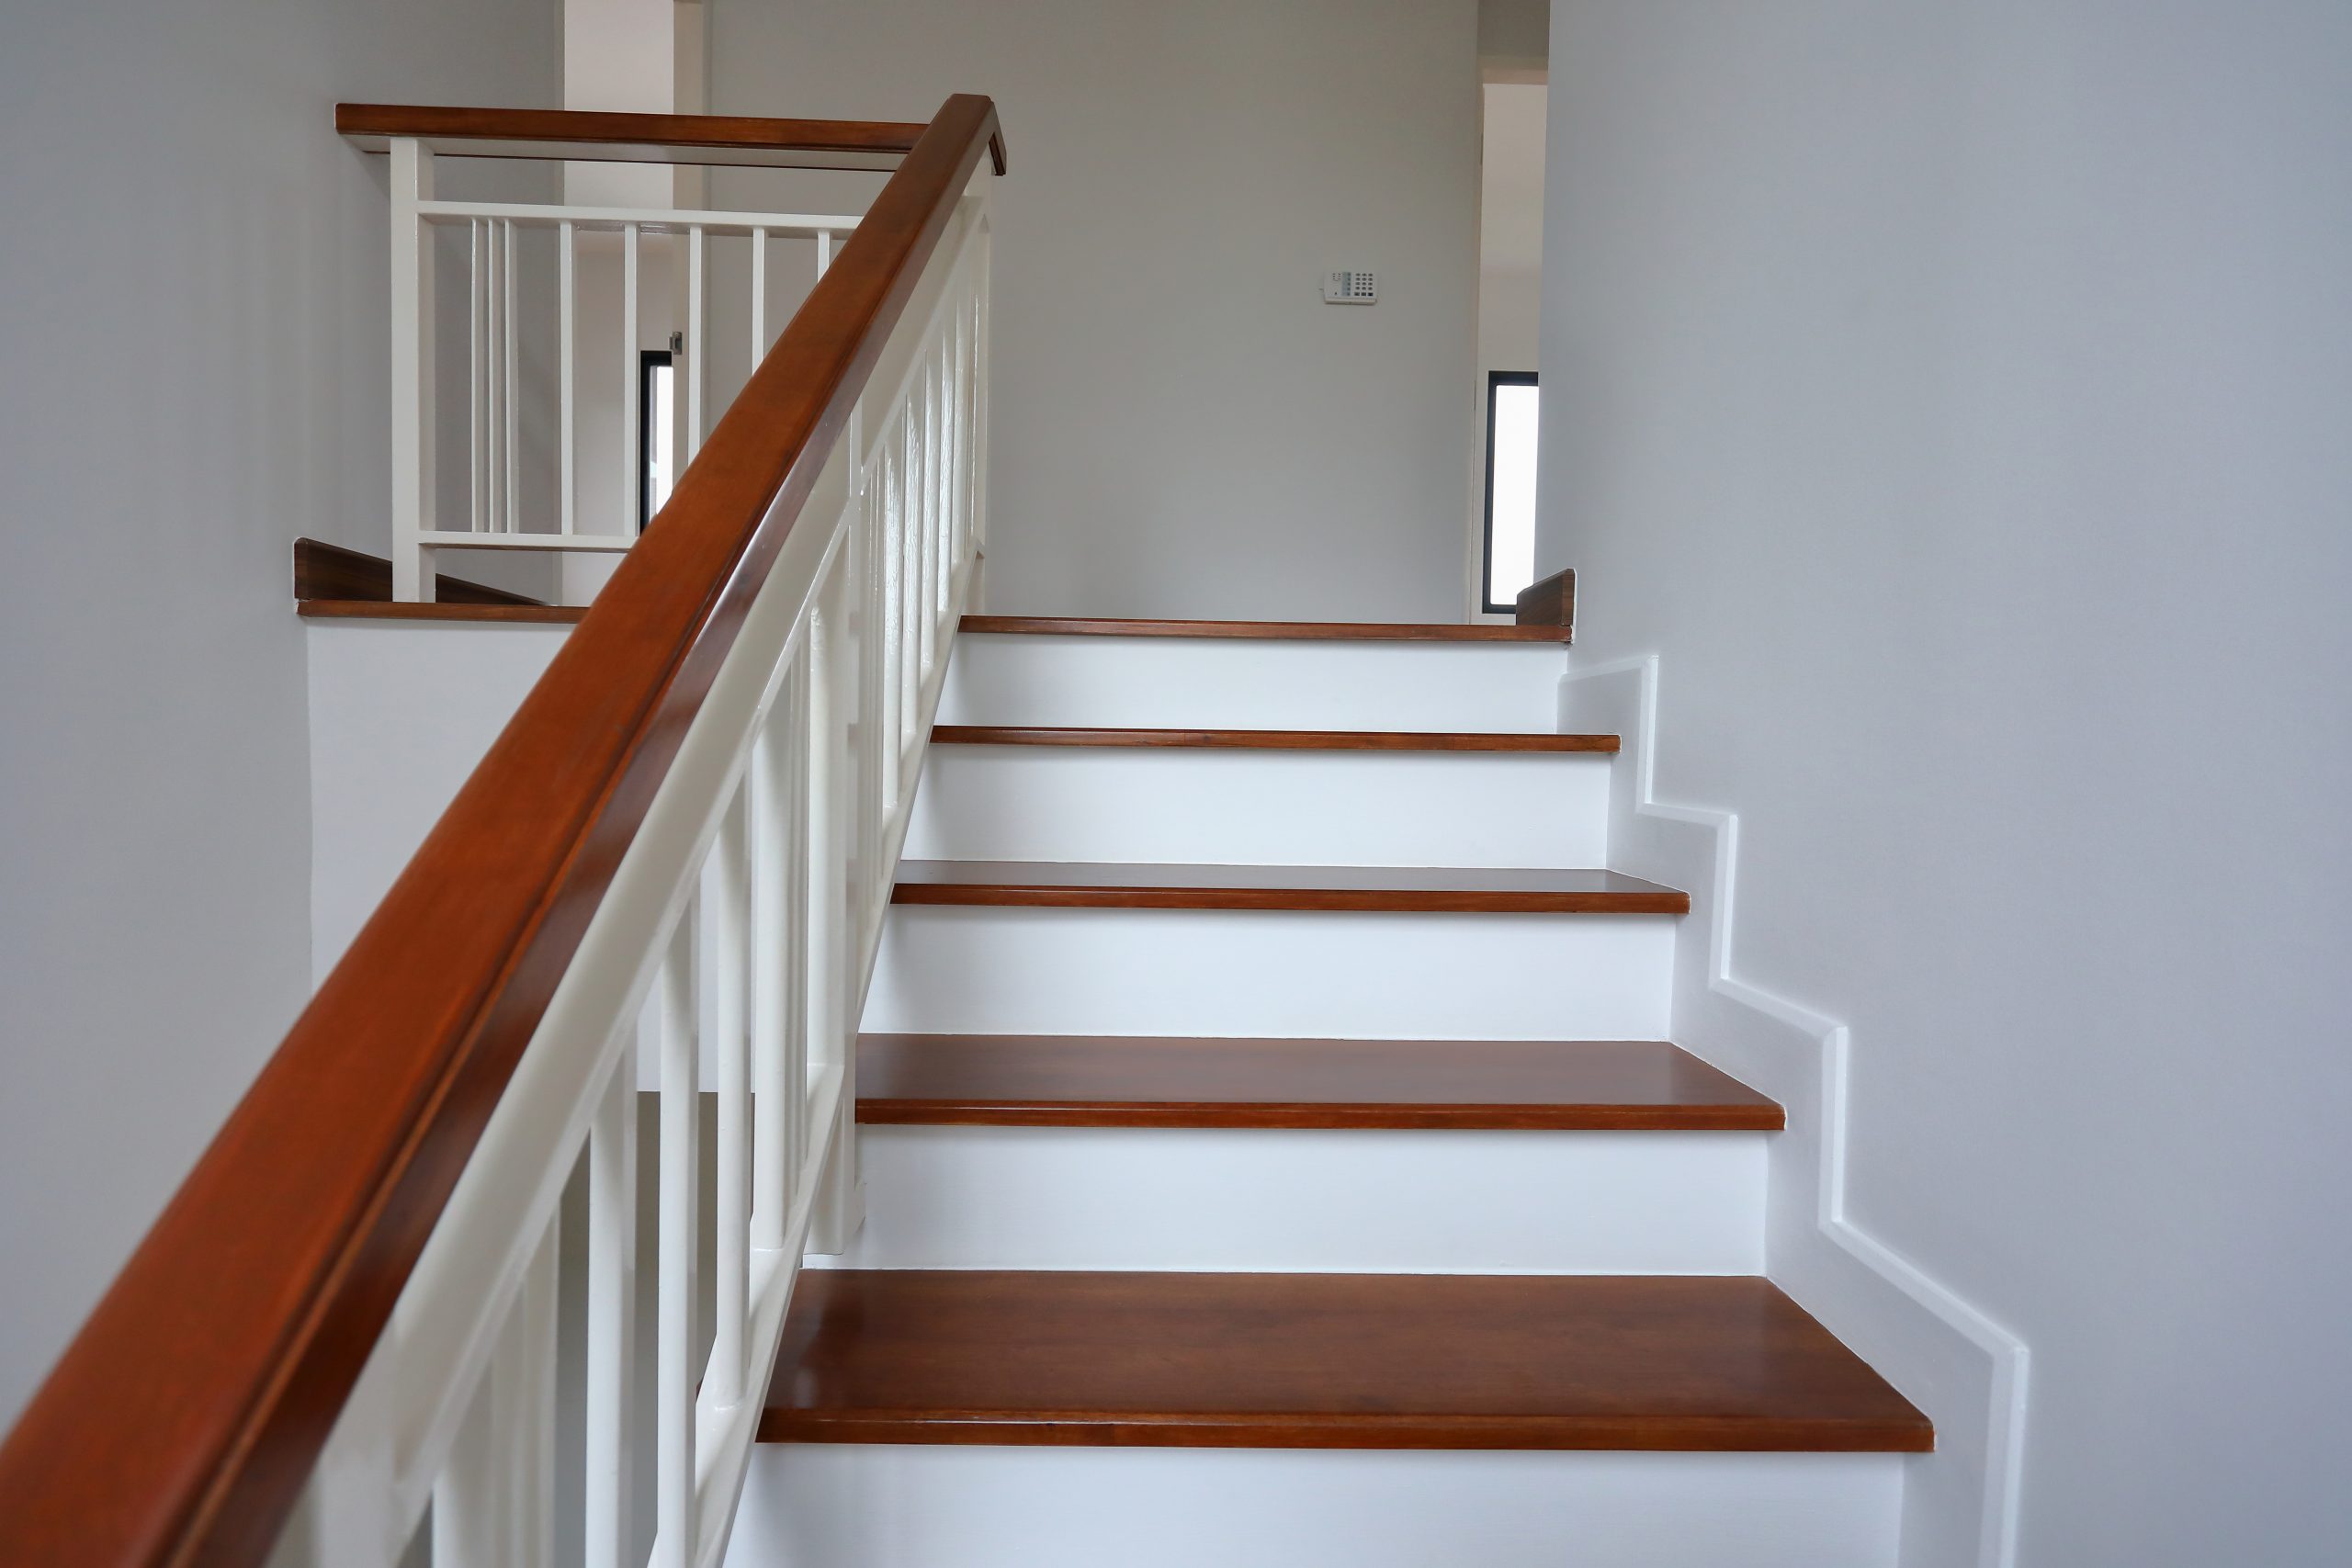 Wooden staircase leading to second floor of residential home